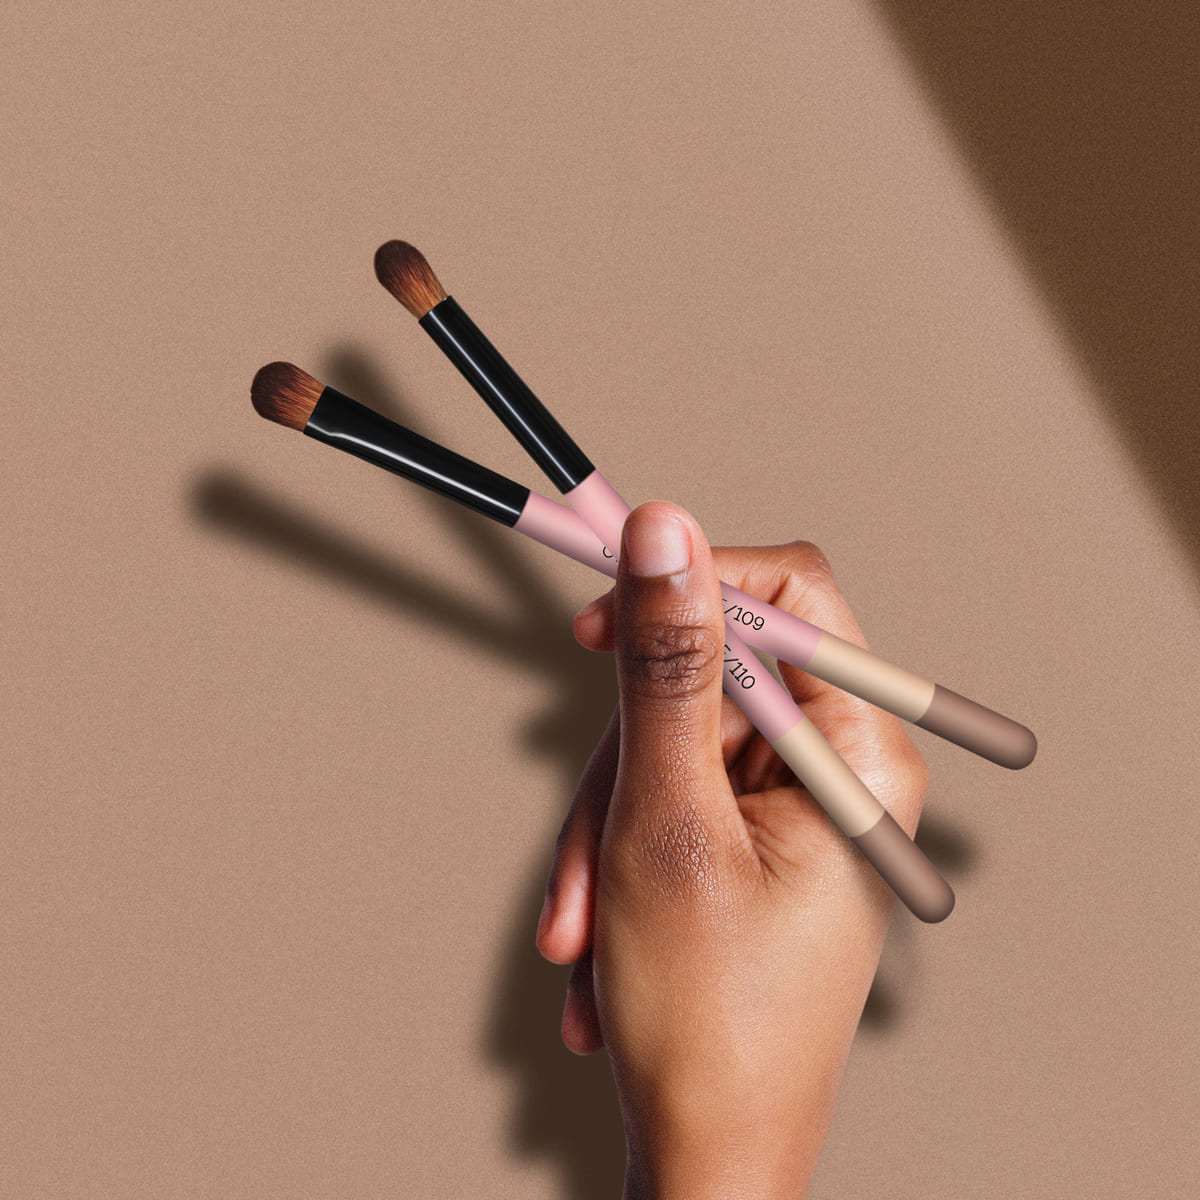 Experience the artistry of Otis Batterbee's Eye Brush Duo Set, with super soft bristles for seamless blending, Peta-approved vegan luxury, and killer brushes designed to elevate your smoky eye to the next level.